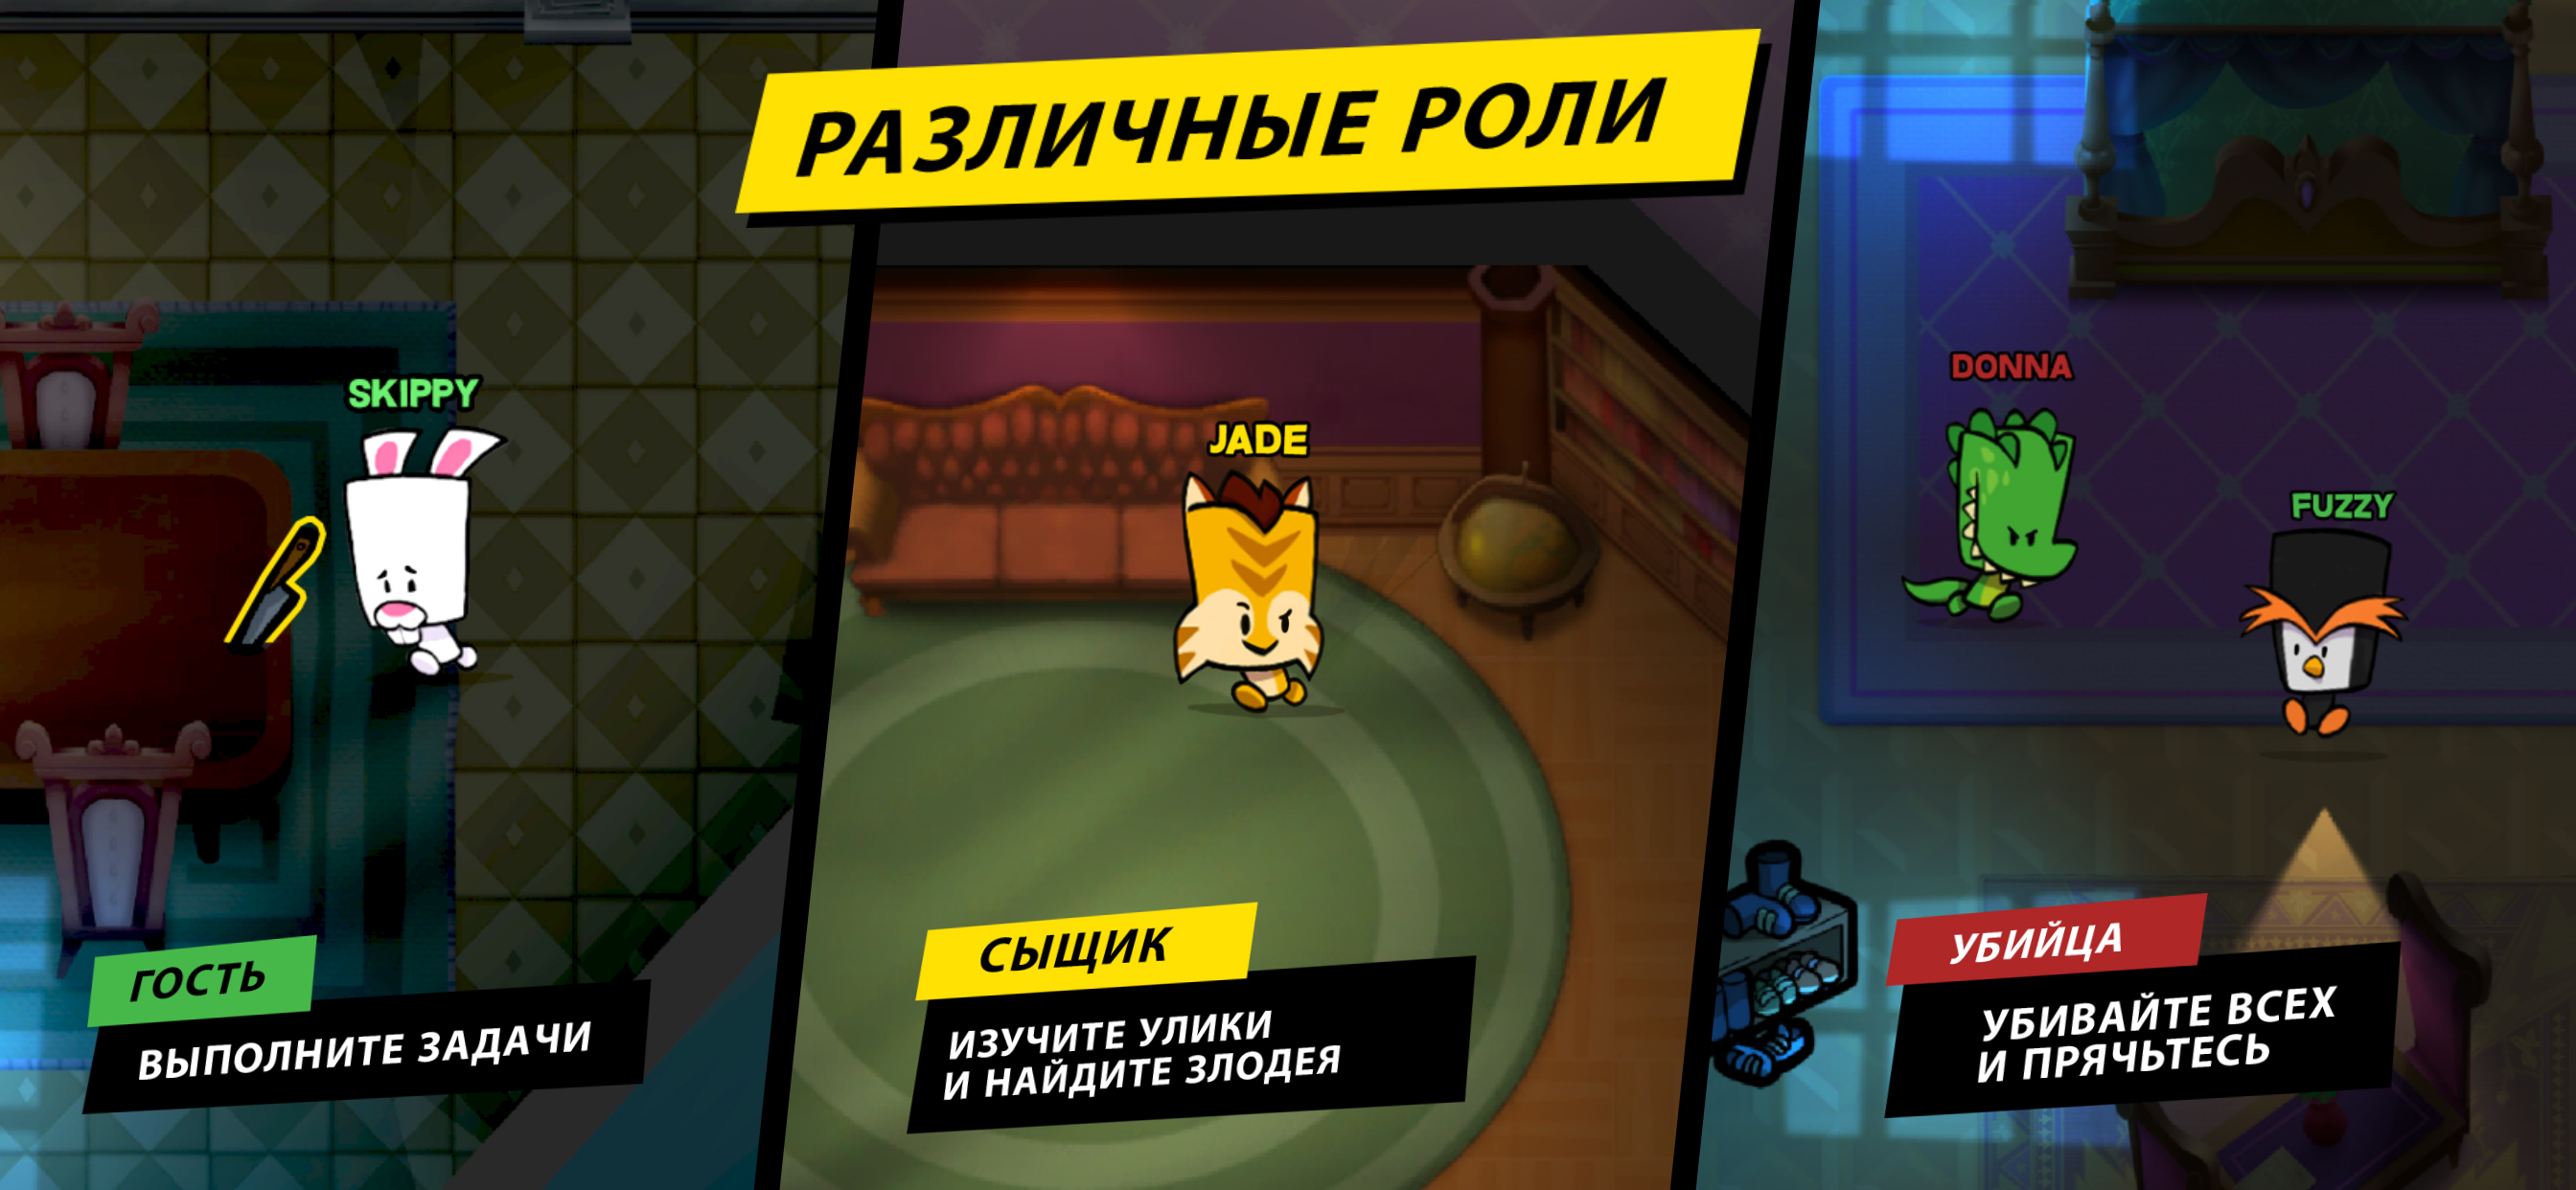 Mysterious game v2. Игра suspects тайный особняк. Suspects таинственный особняк Джейд. Suspects таинственный таинственный особняк игра. Таинственный особняк игра suspects герои.